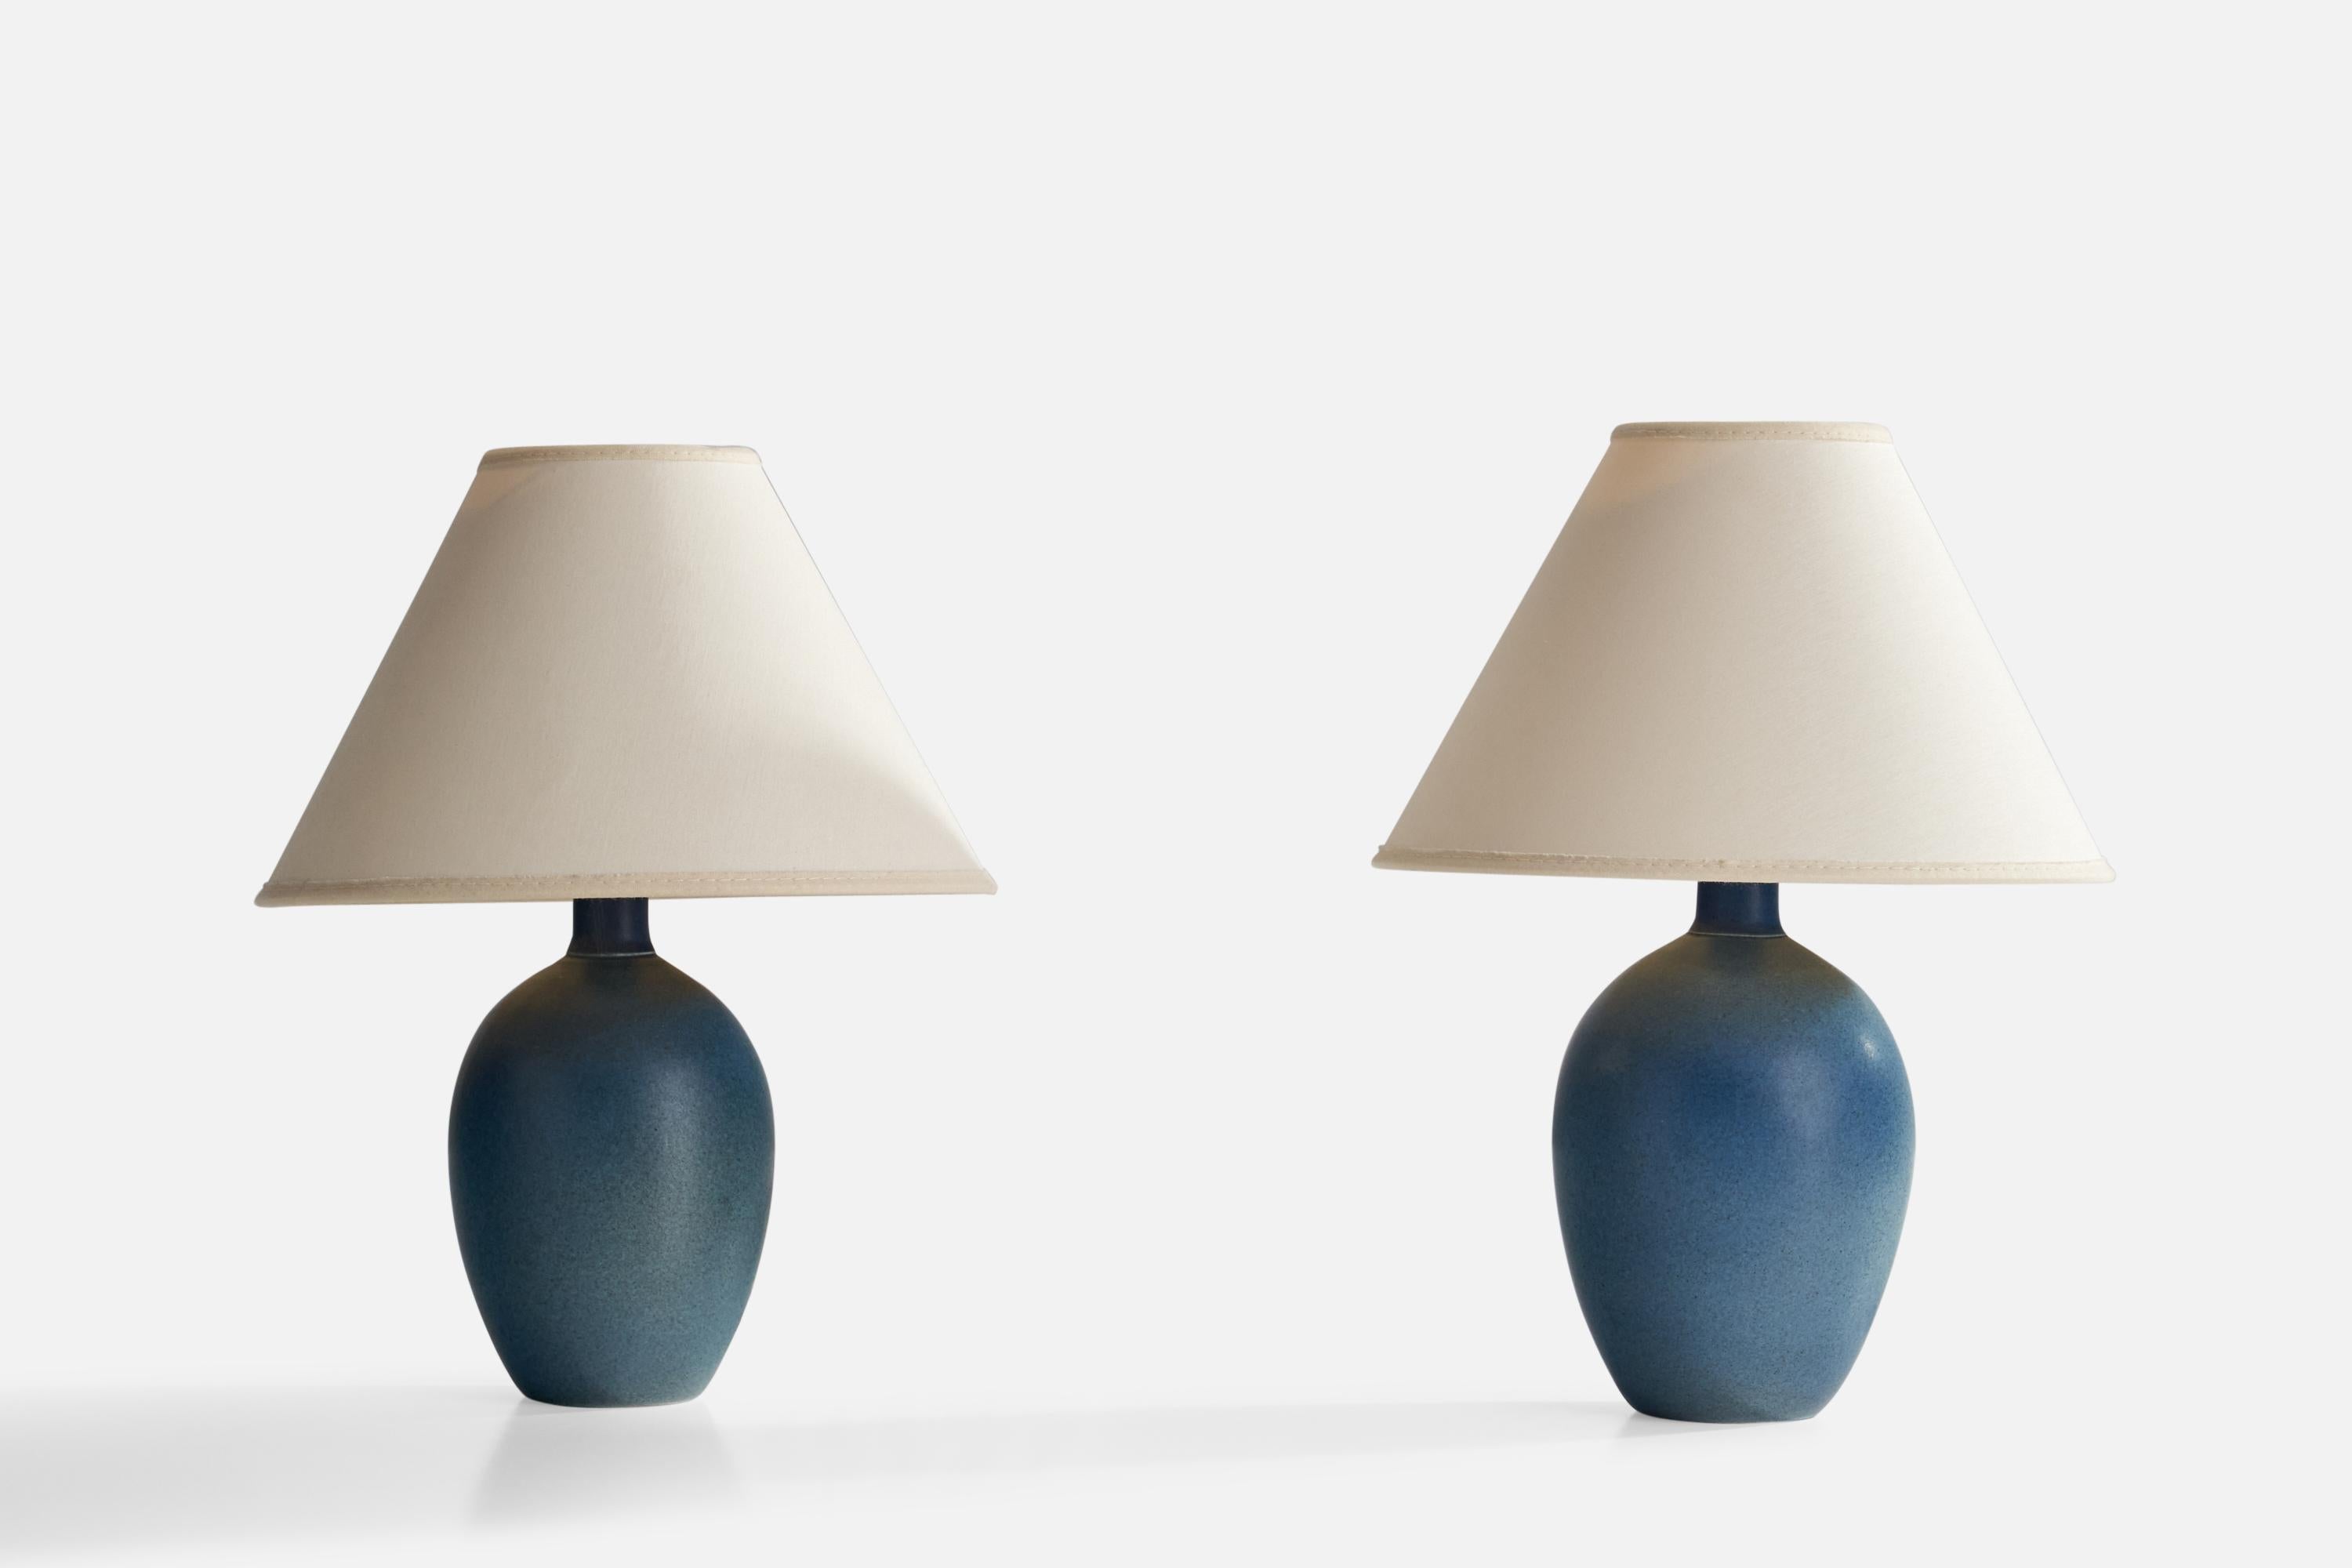 A pair of blue-glazed stoneware and off-white fabric table lamps designed and produced in Sweden, 1970s.

Overall Dimensions (inches): 8.25”  H x 4” D
Stated dimensions include shade.
Bulb Specifications: E-26 Bulb
Number of Sockets: 2
All lighting